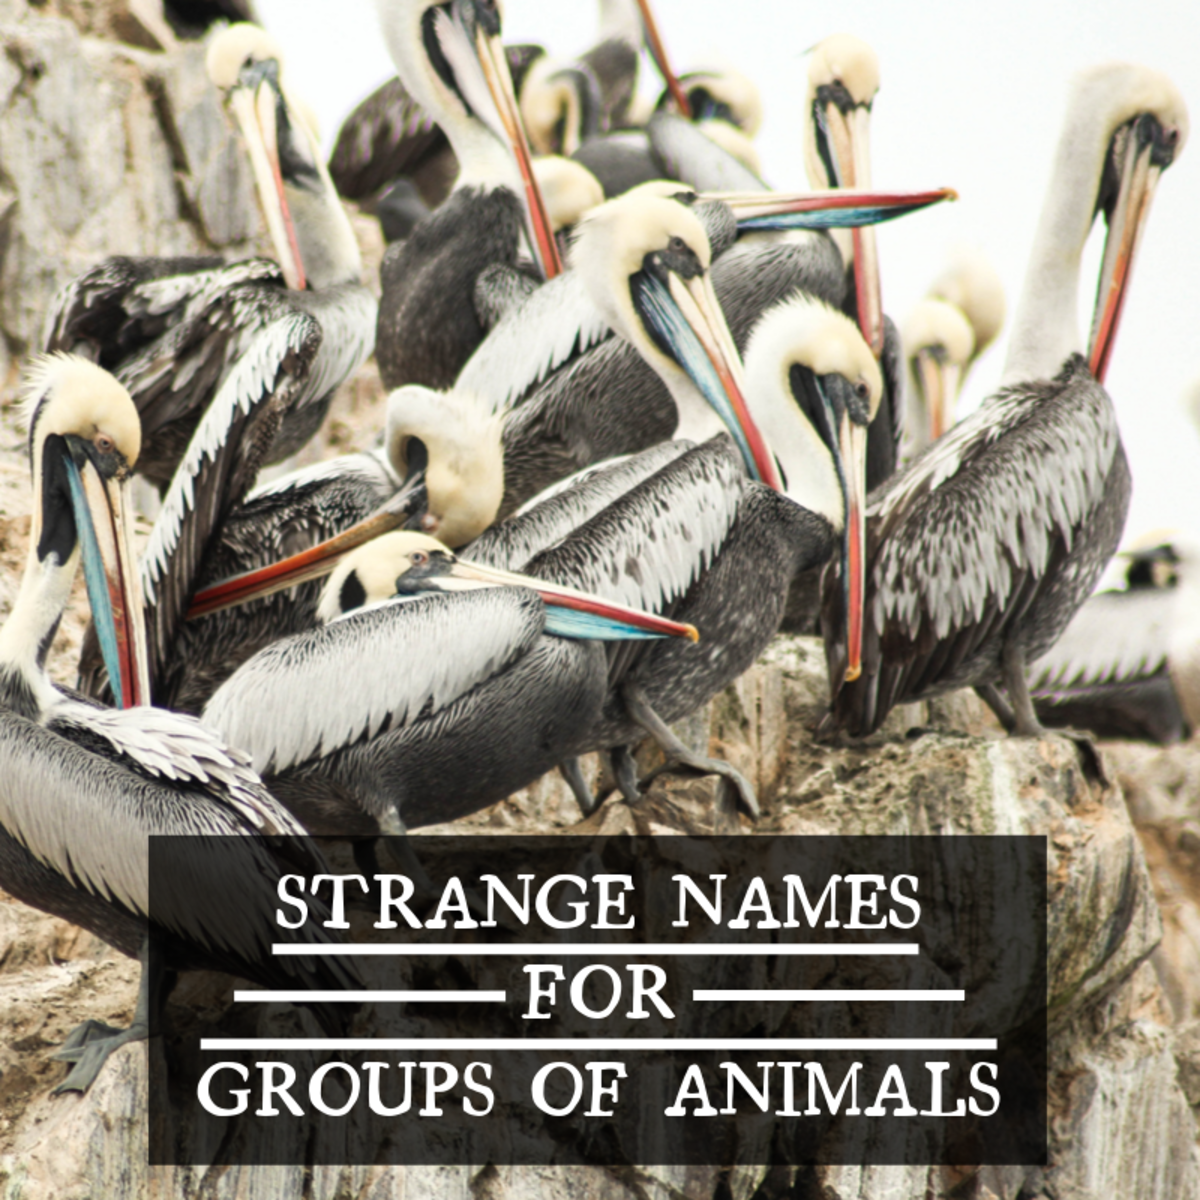 What group of animals is called a fleet?